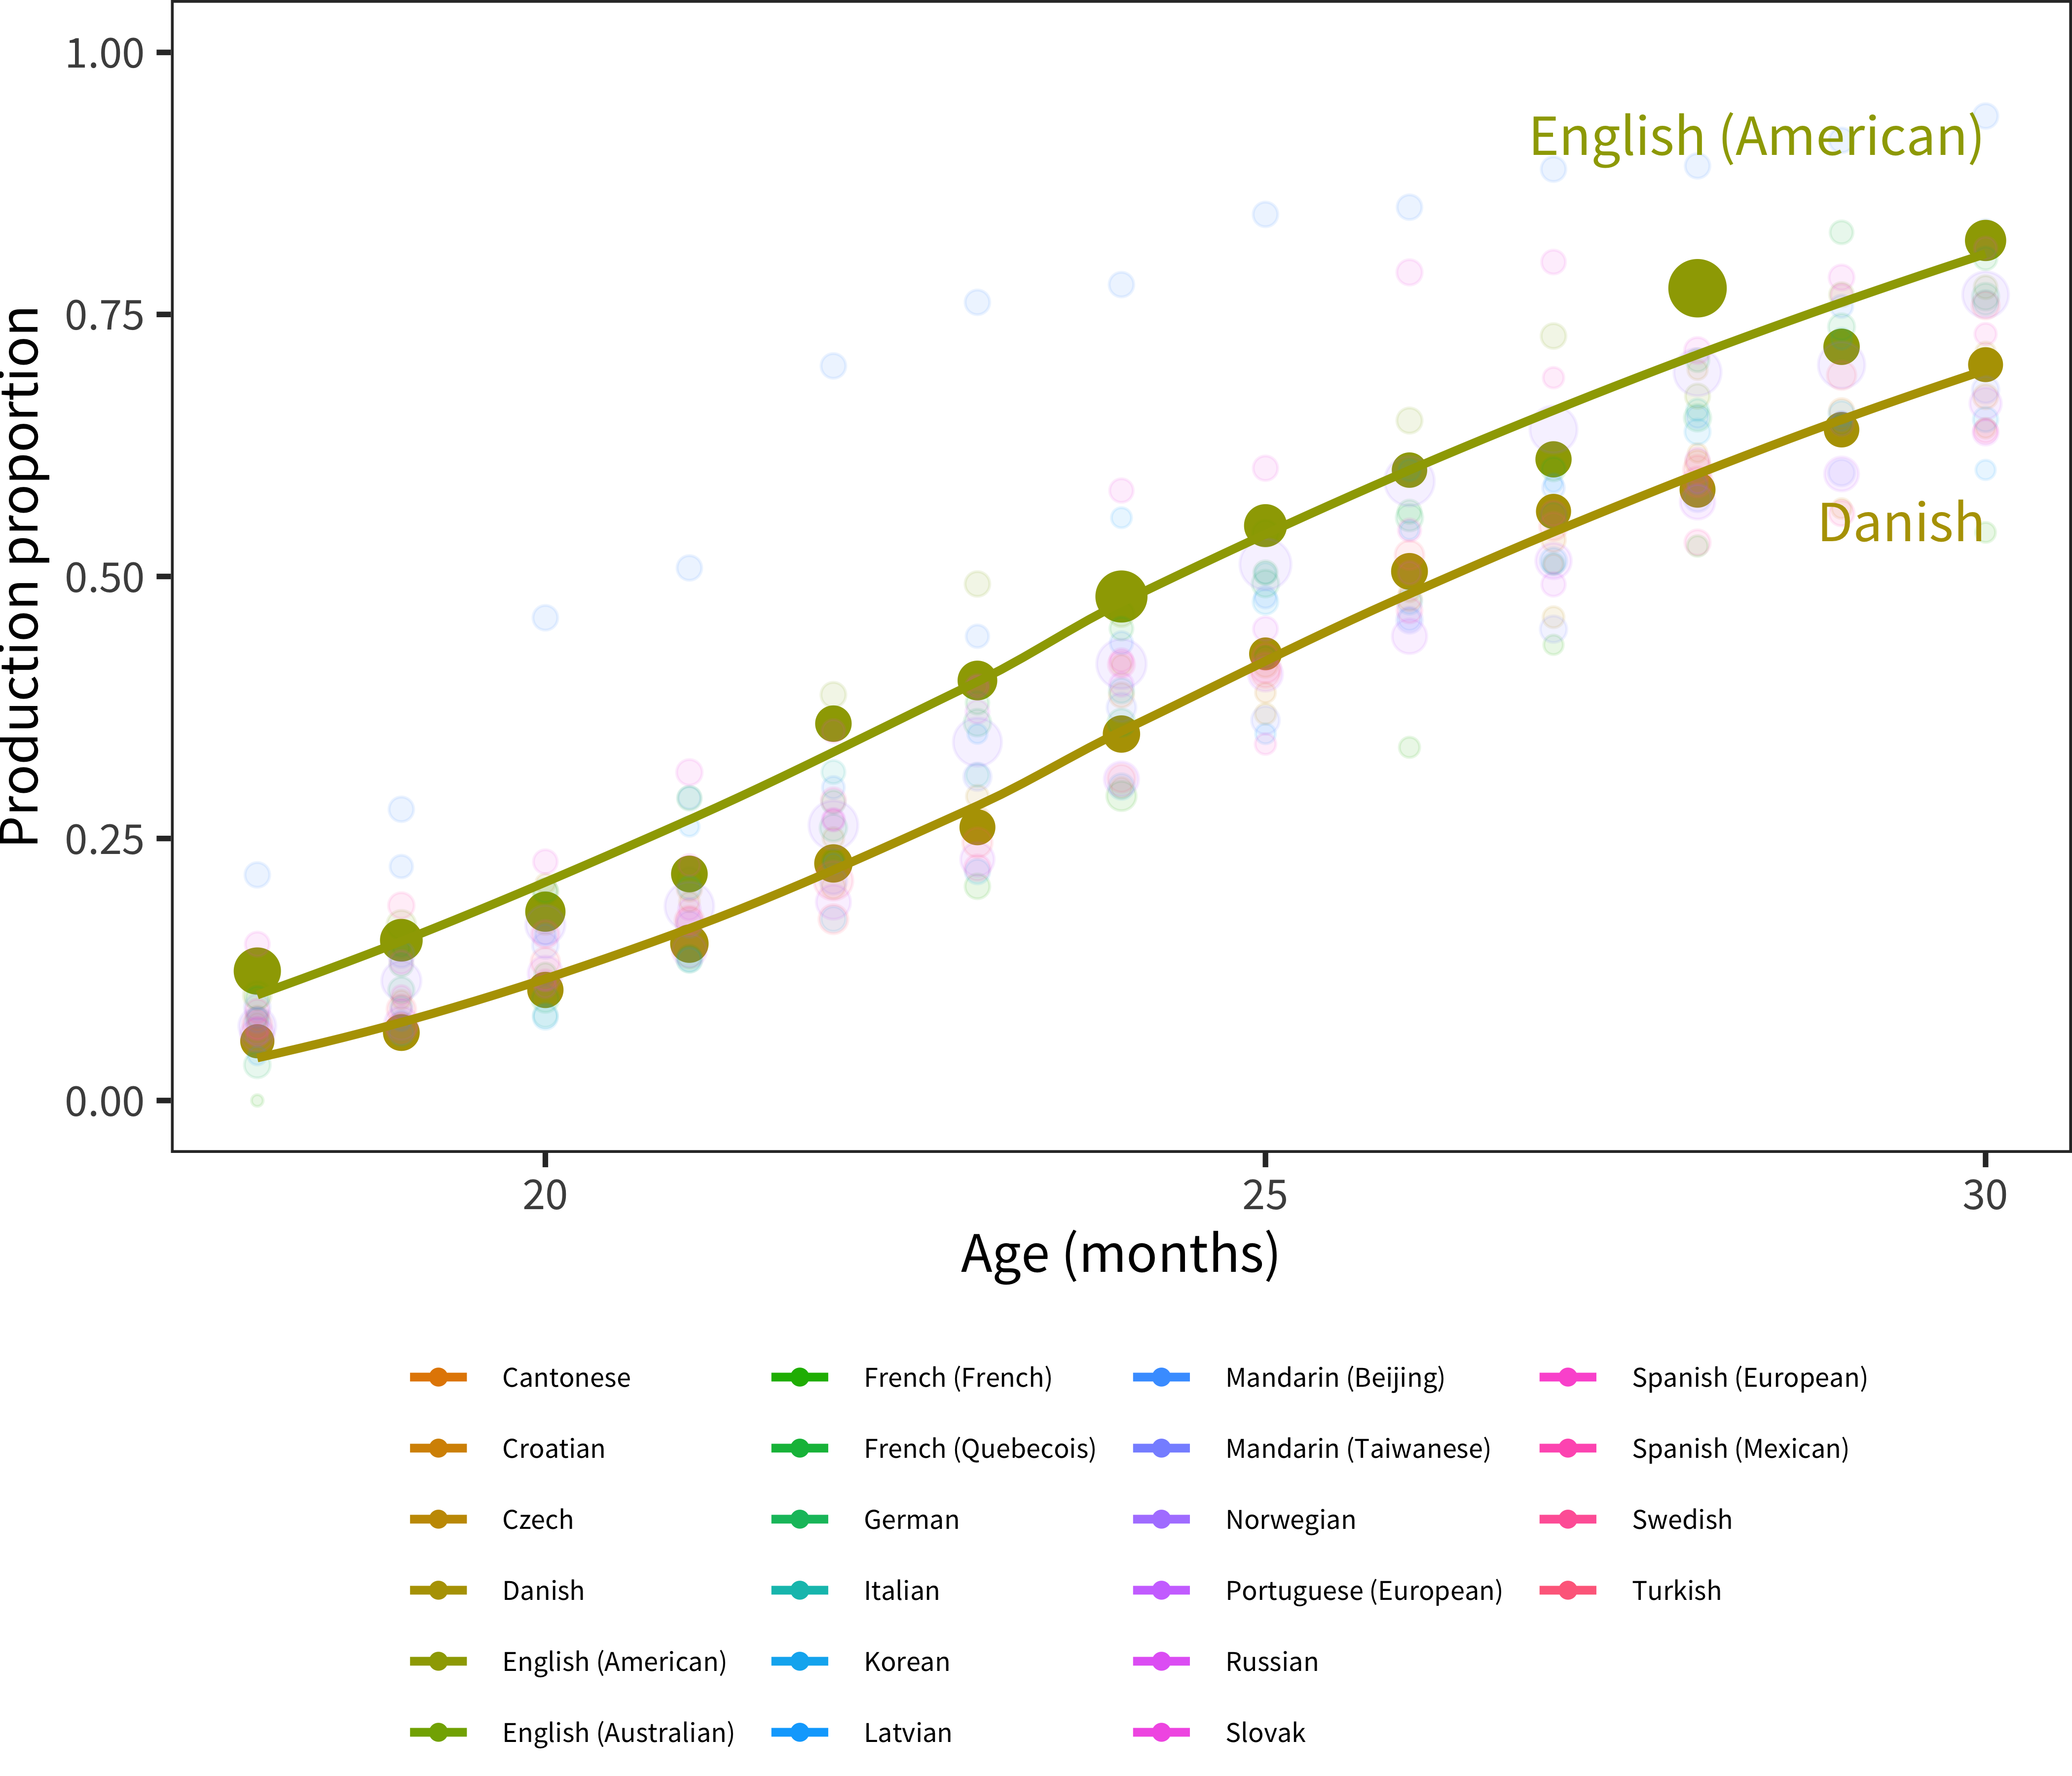 Cross-linguistic production data, proportions plotted by age. English (American) and Danish are highlighted.